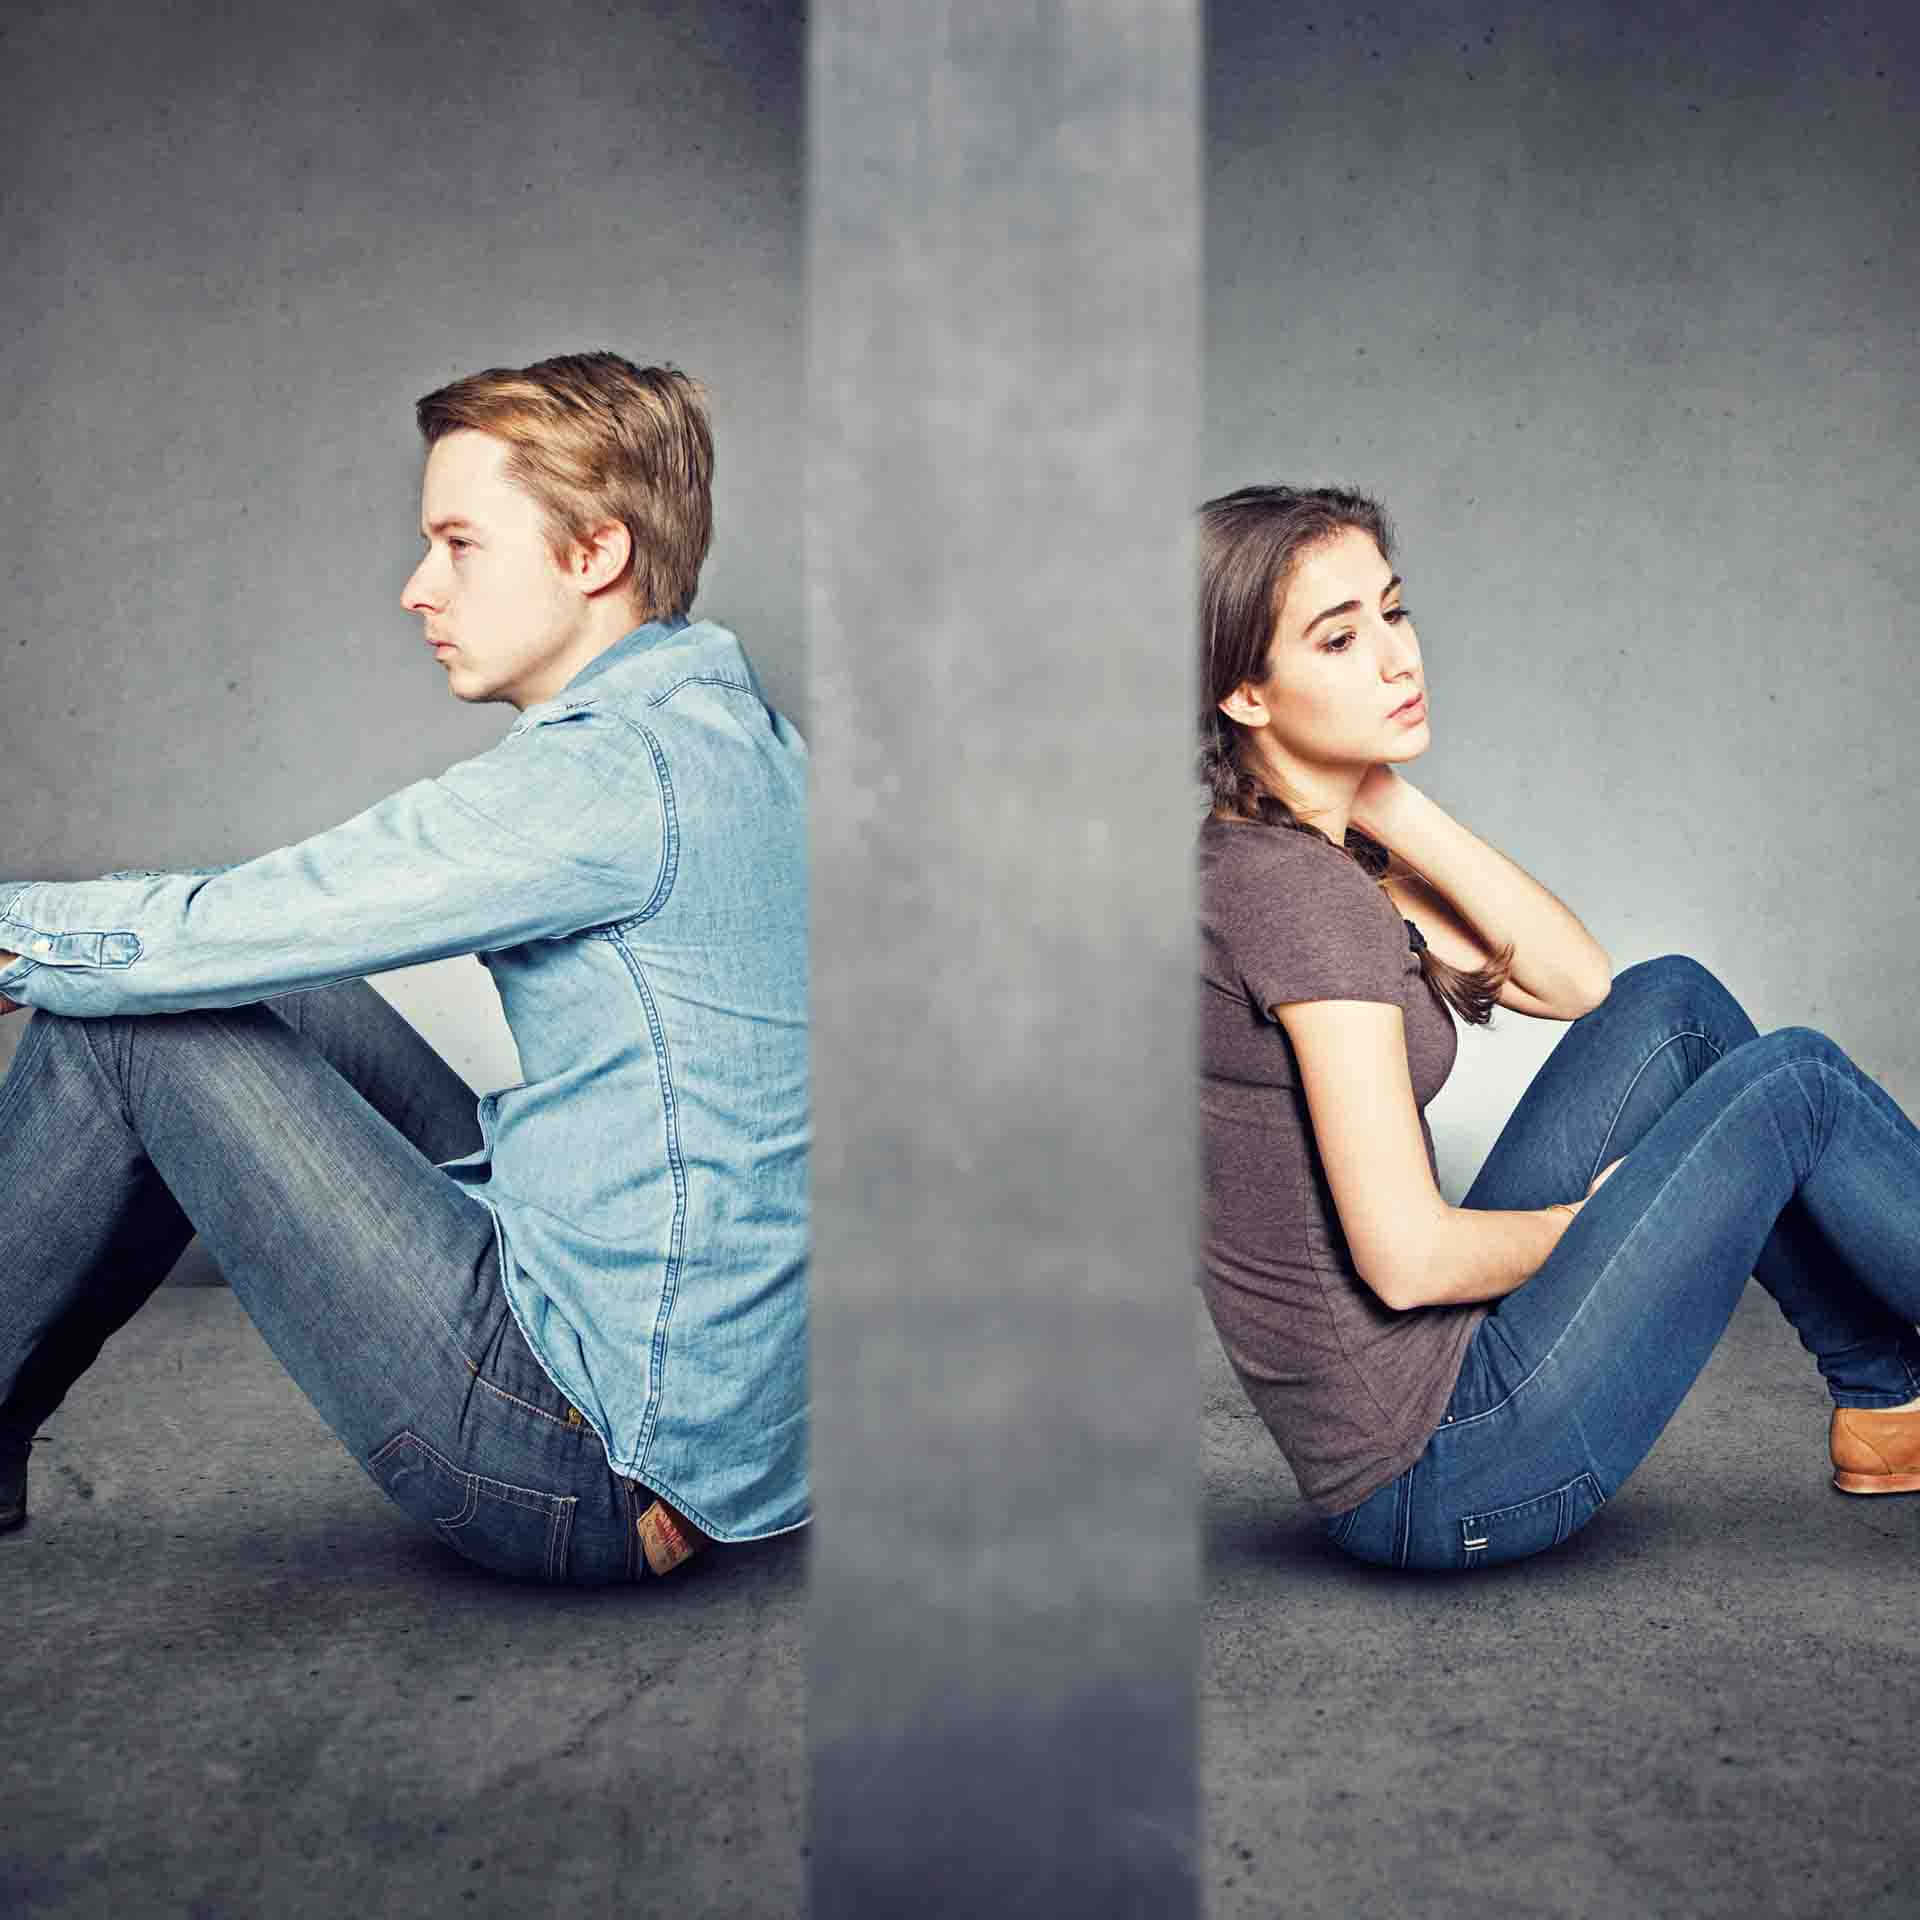 Two People Sitting On The Ground, One Is Sitting On The Floor And The Other Is Sitting On The Floor